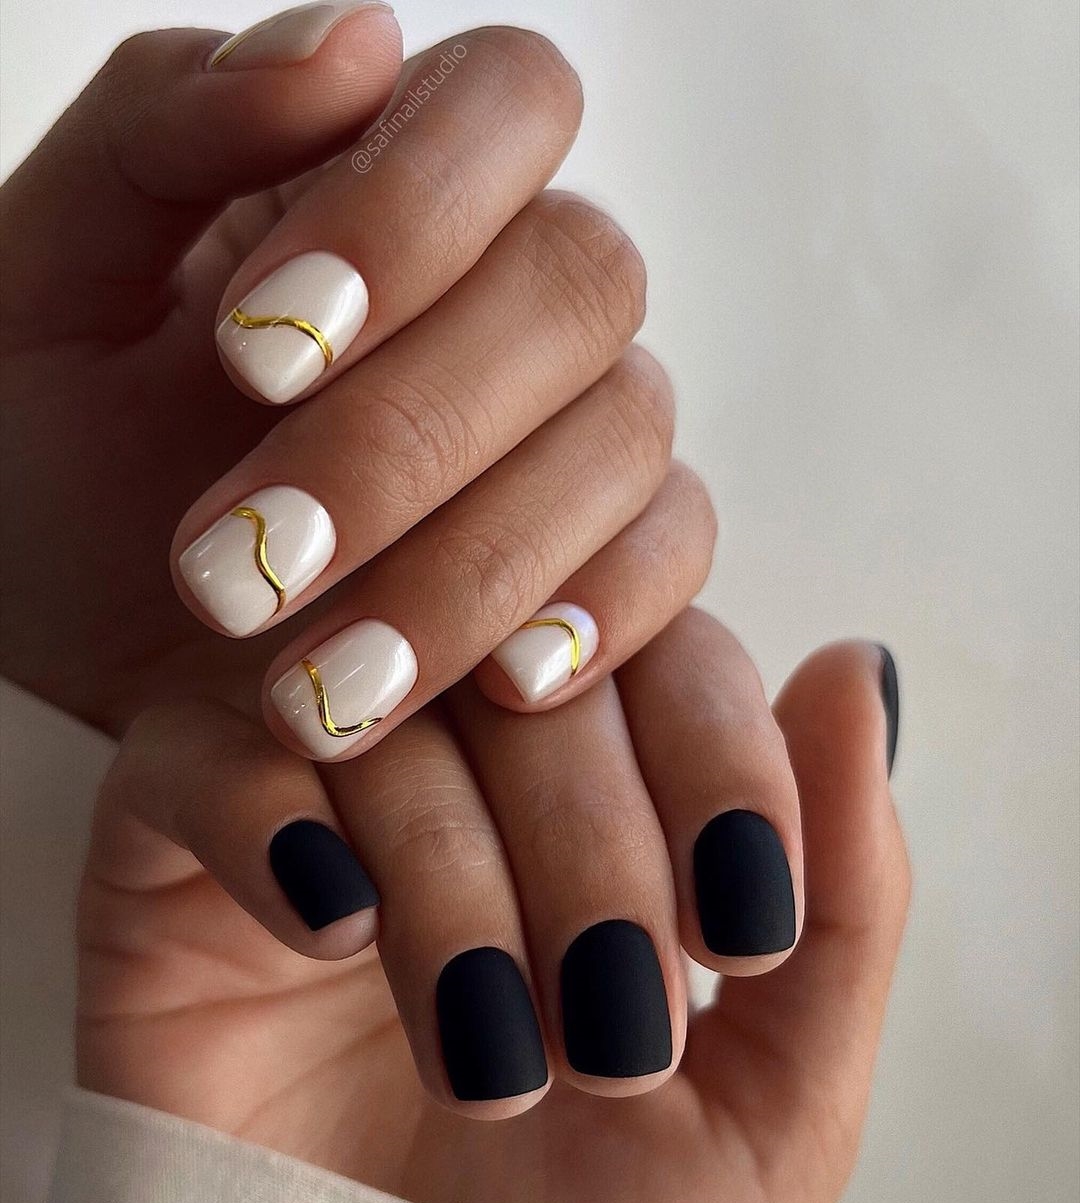 Black and White Nail Design with Gold Lines